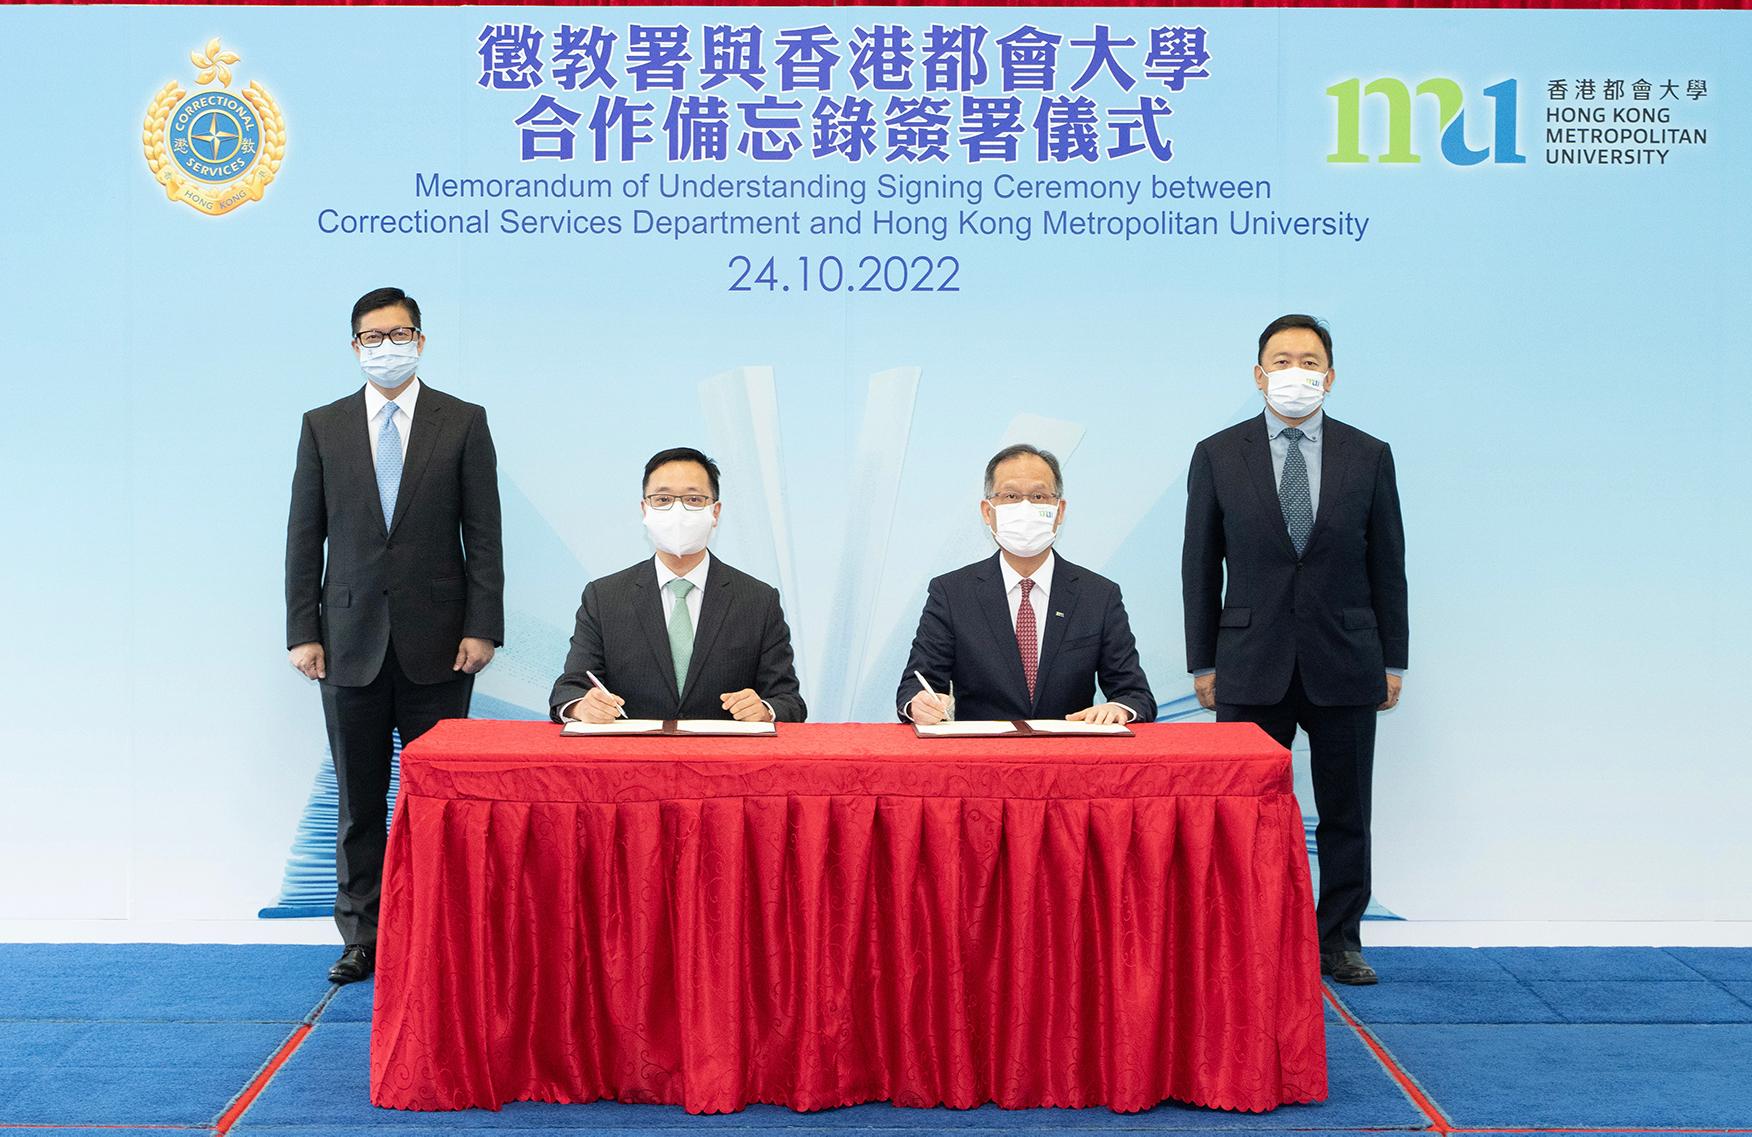 The Correctional Services Department and the Hong Kong Metropolitan University (HKMU) today (October 24) signed a Memorandum of Understanding (MoU) to strengthen learning support for persons in custody. The MoU was signed by the Commissioner of Correctional Services, Mr Wong Kwok-hing (front row, left), and the President of the HKMU, Professor Paul Lam (front row, right), and witnessed by the Secretary for Security, Mr Tang Ping-keung (back row, left), and the Council Chairman of the HKMU, Dr Conrad Wong (back row, right).

